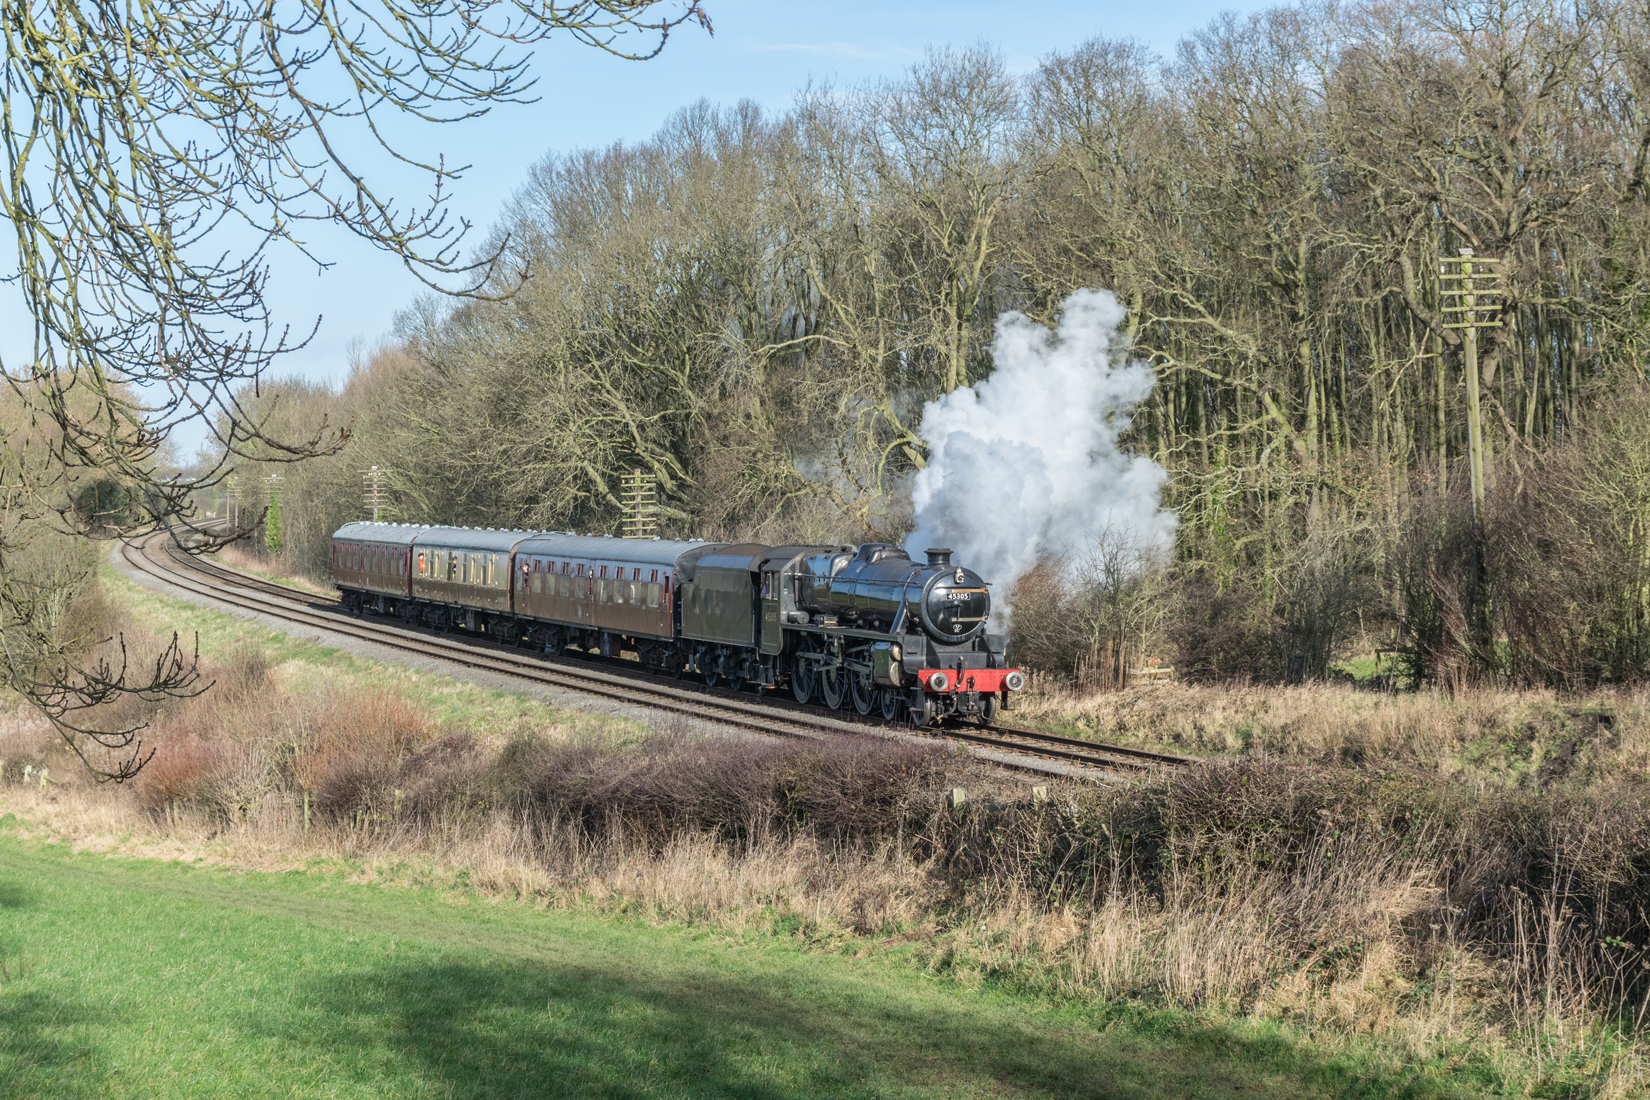 LMS Stanier Class 5 no 45305 at Kinchley Lane